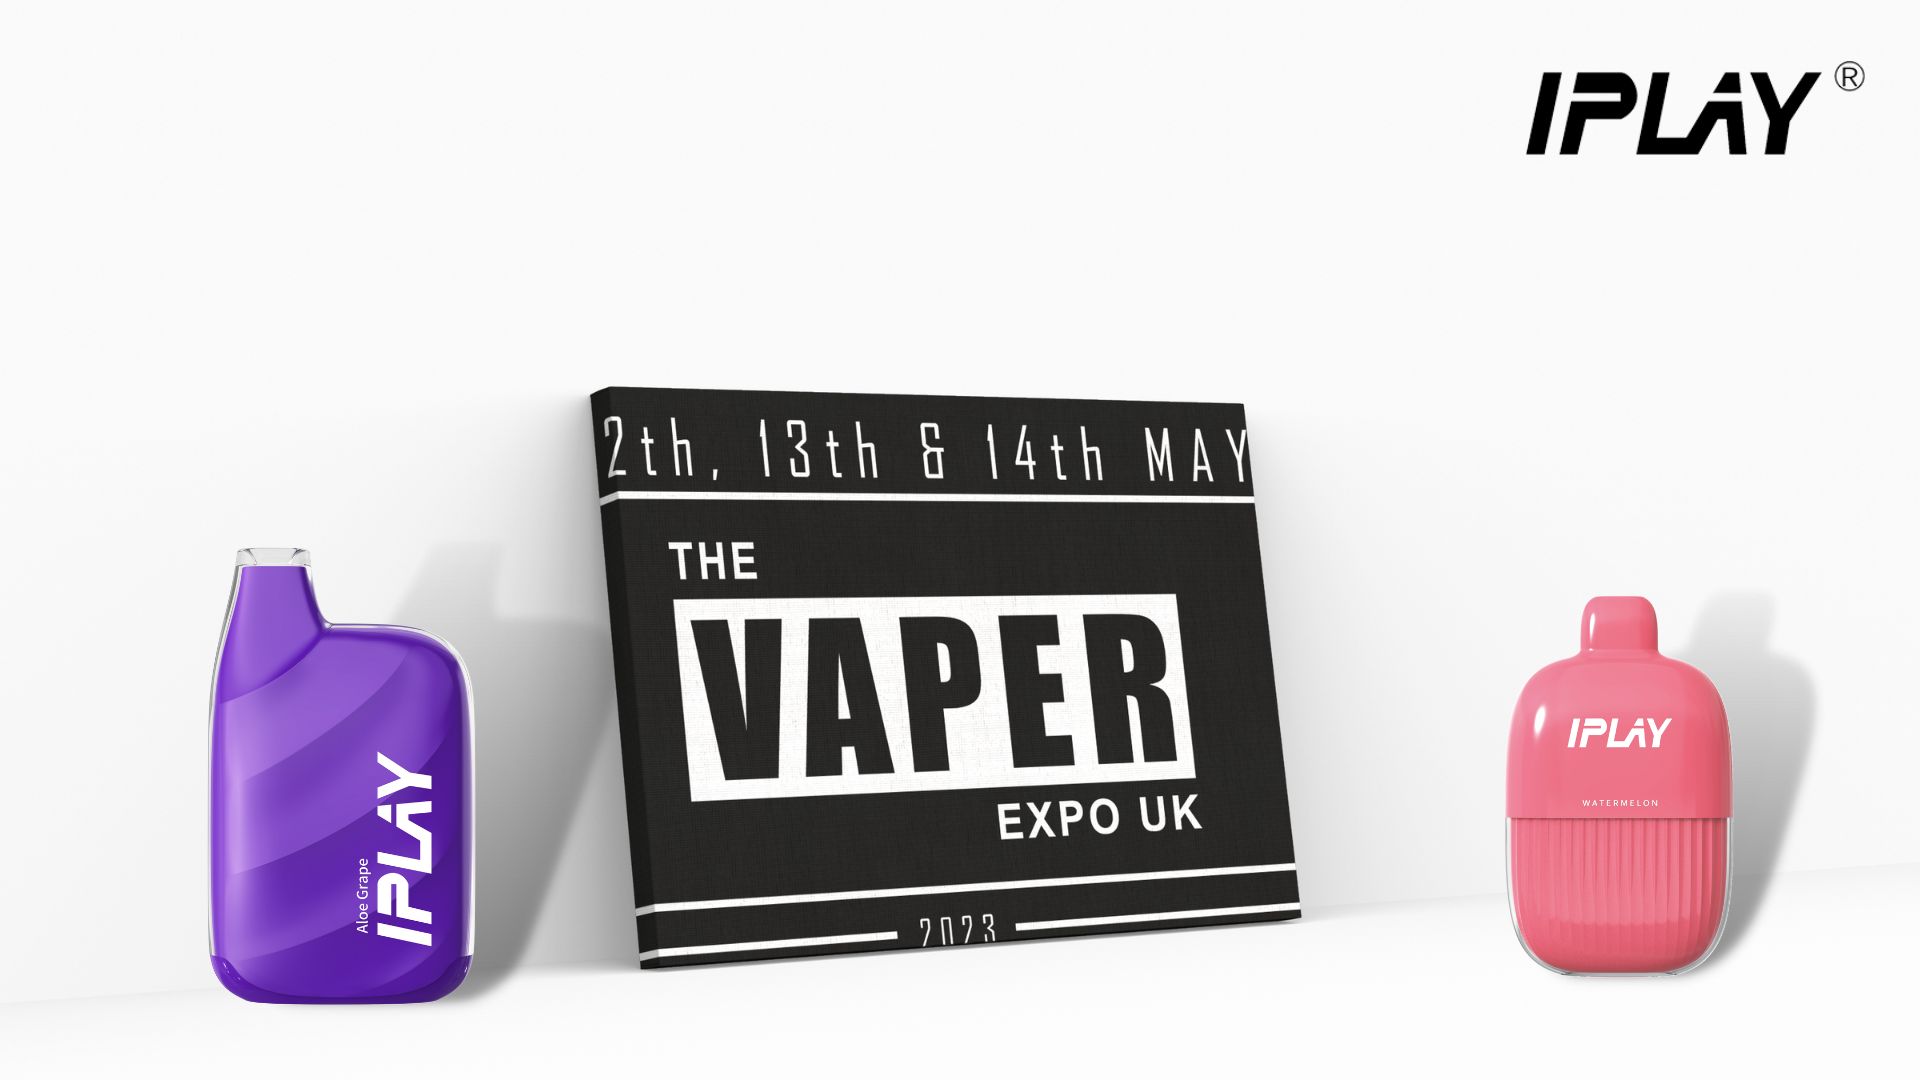 iplay and the vaper expo uk poster